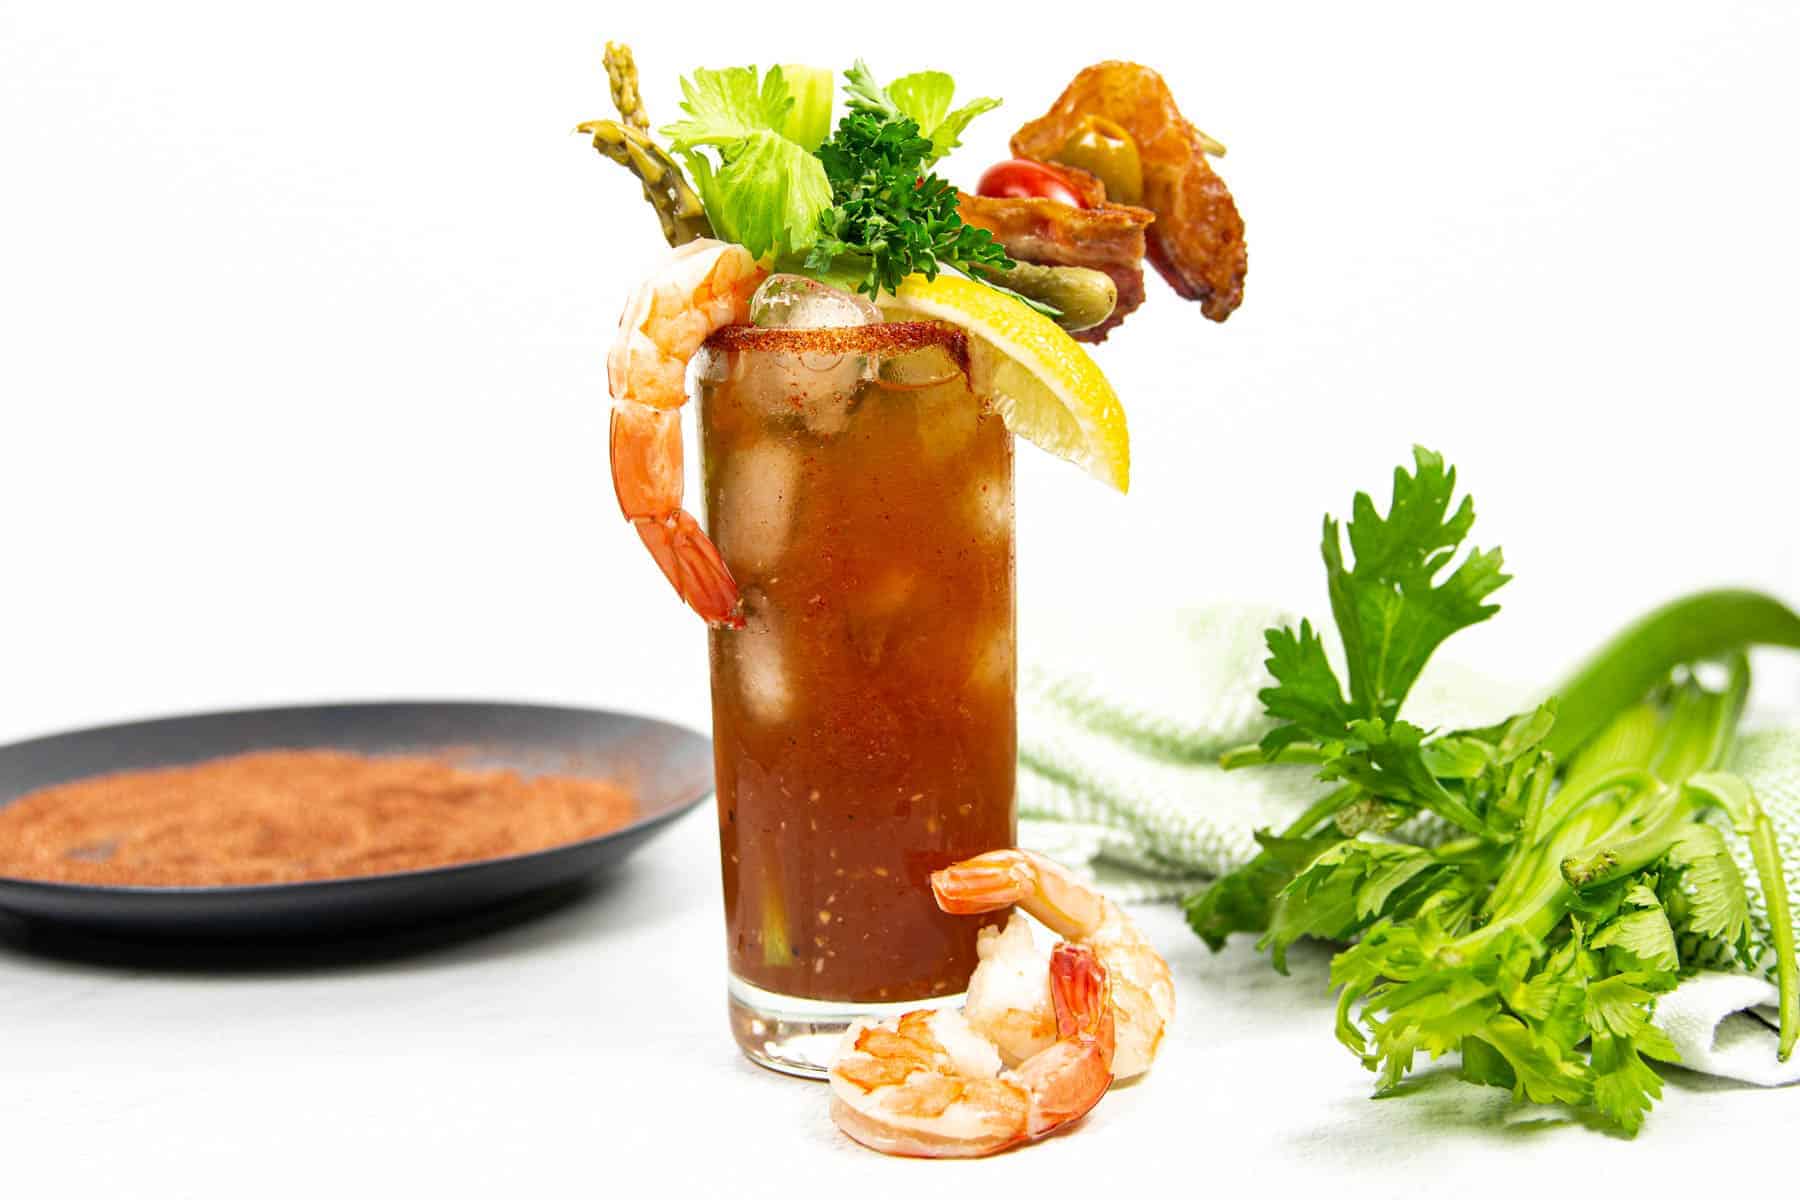 Sshrimp, celery and asparagus garnish a new orleans Bloody Mary.